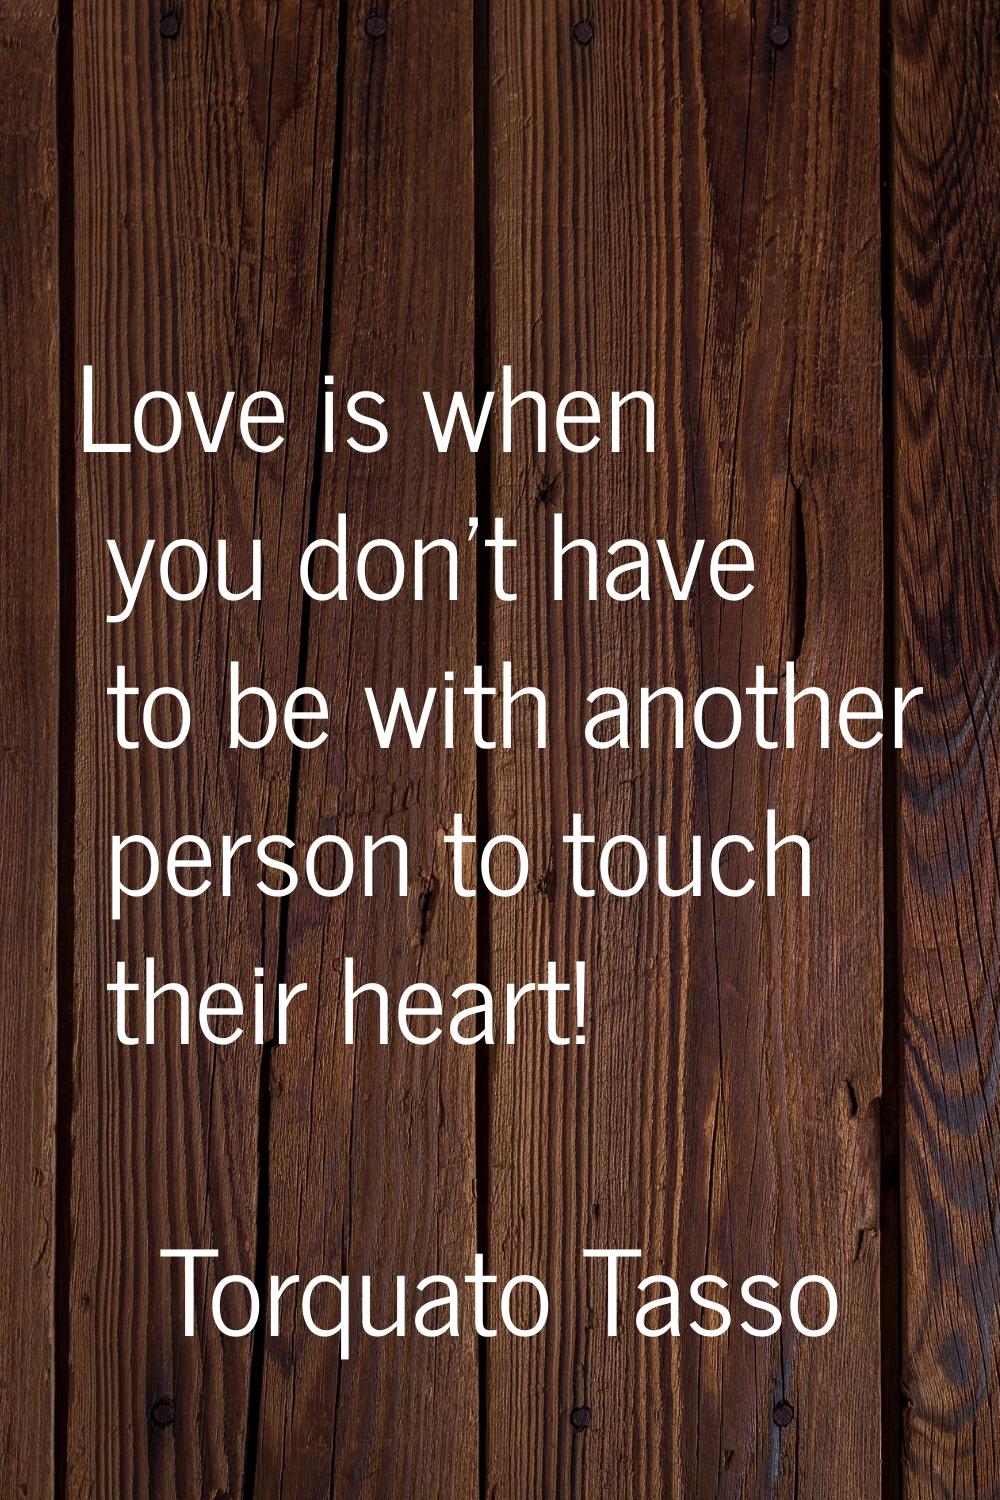 Love is when you don't have to be with another person to touch their heart!